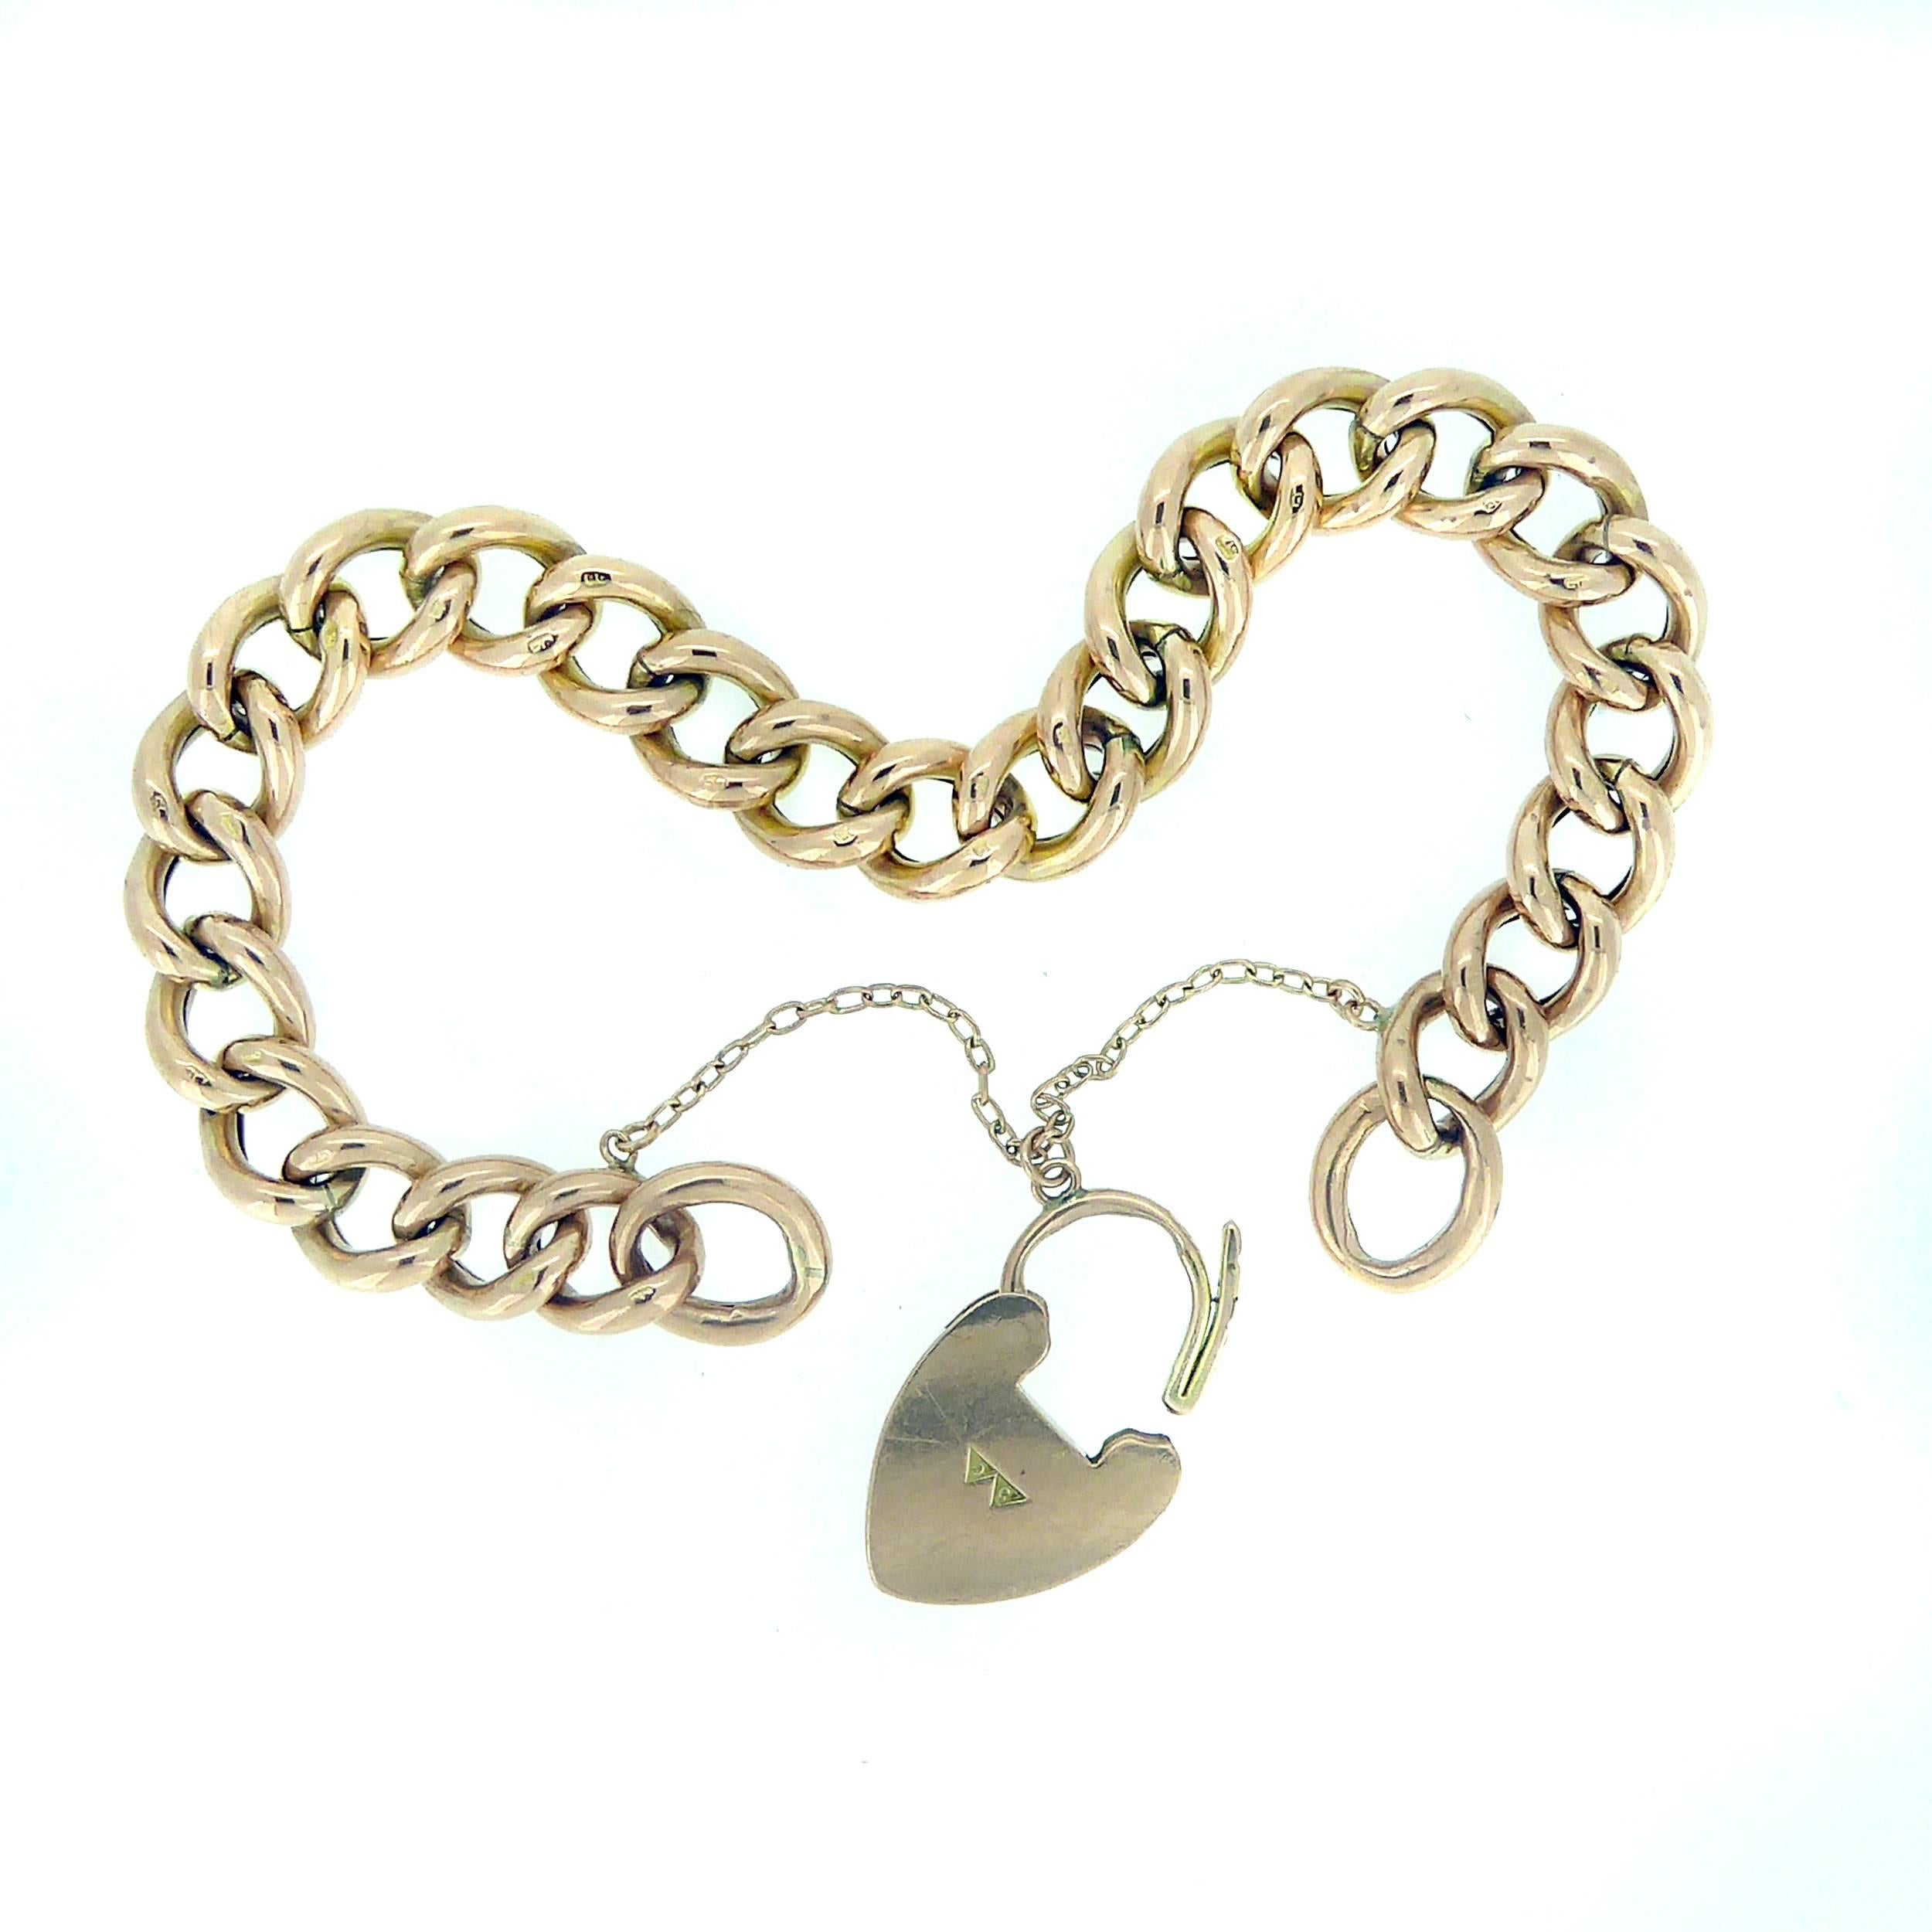 1900s Gold Curb Link Bracelet with Padlock and Safety Chain 1